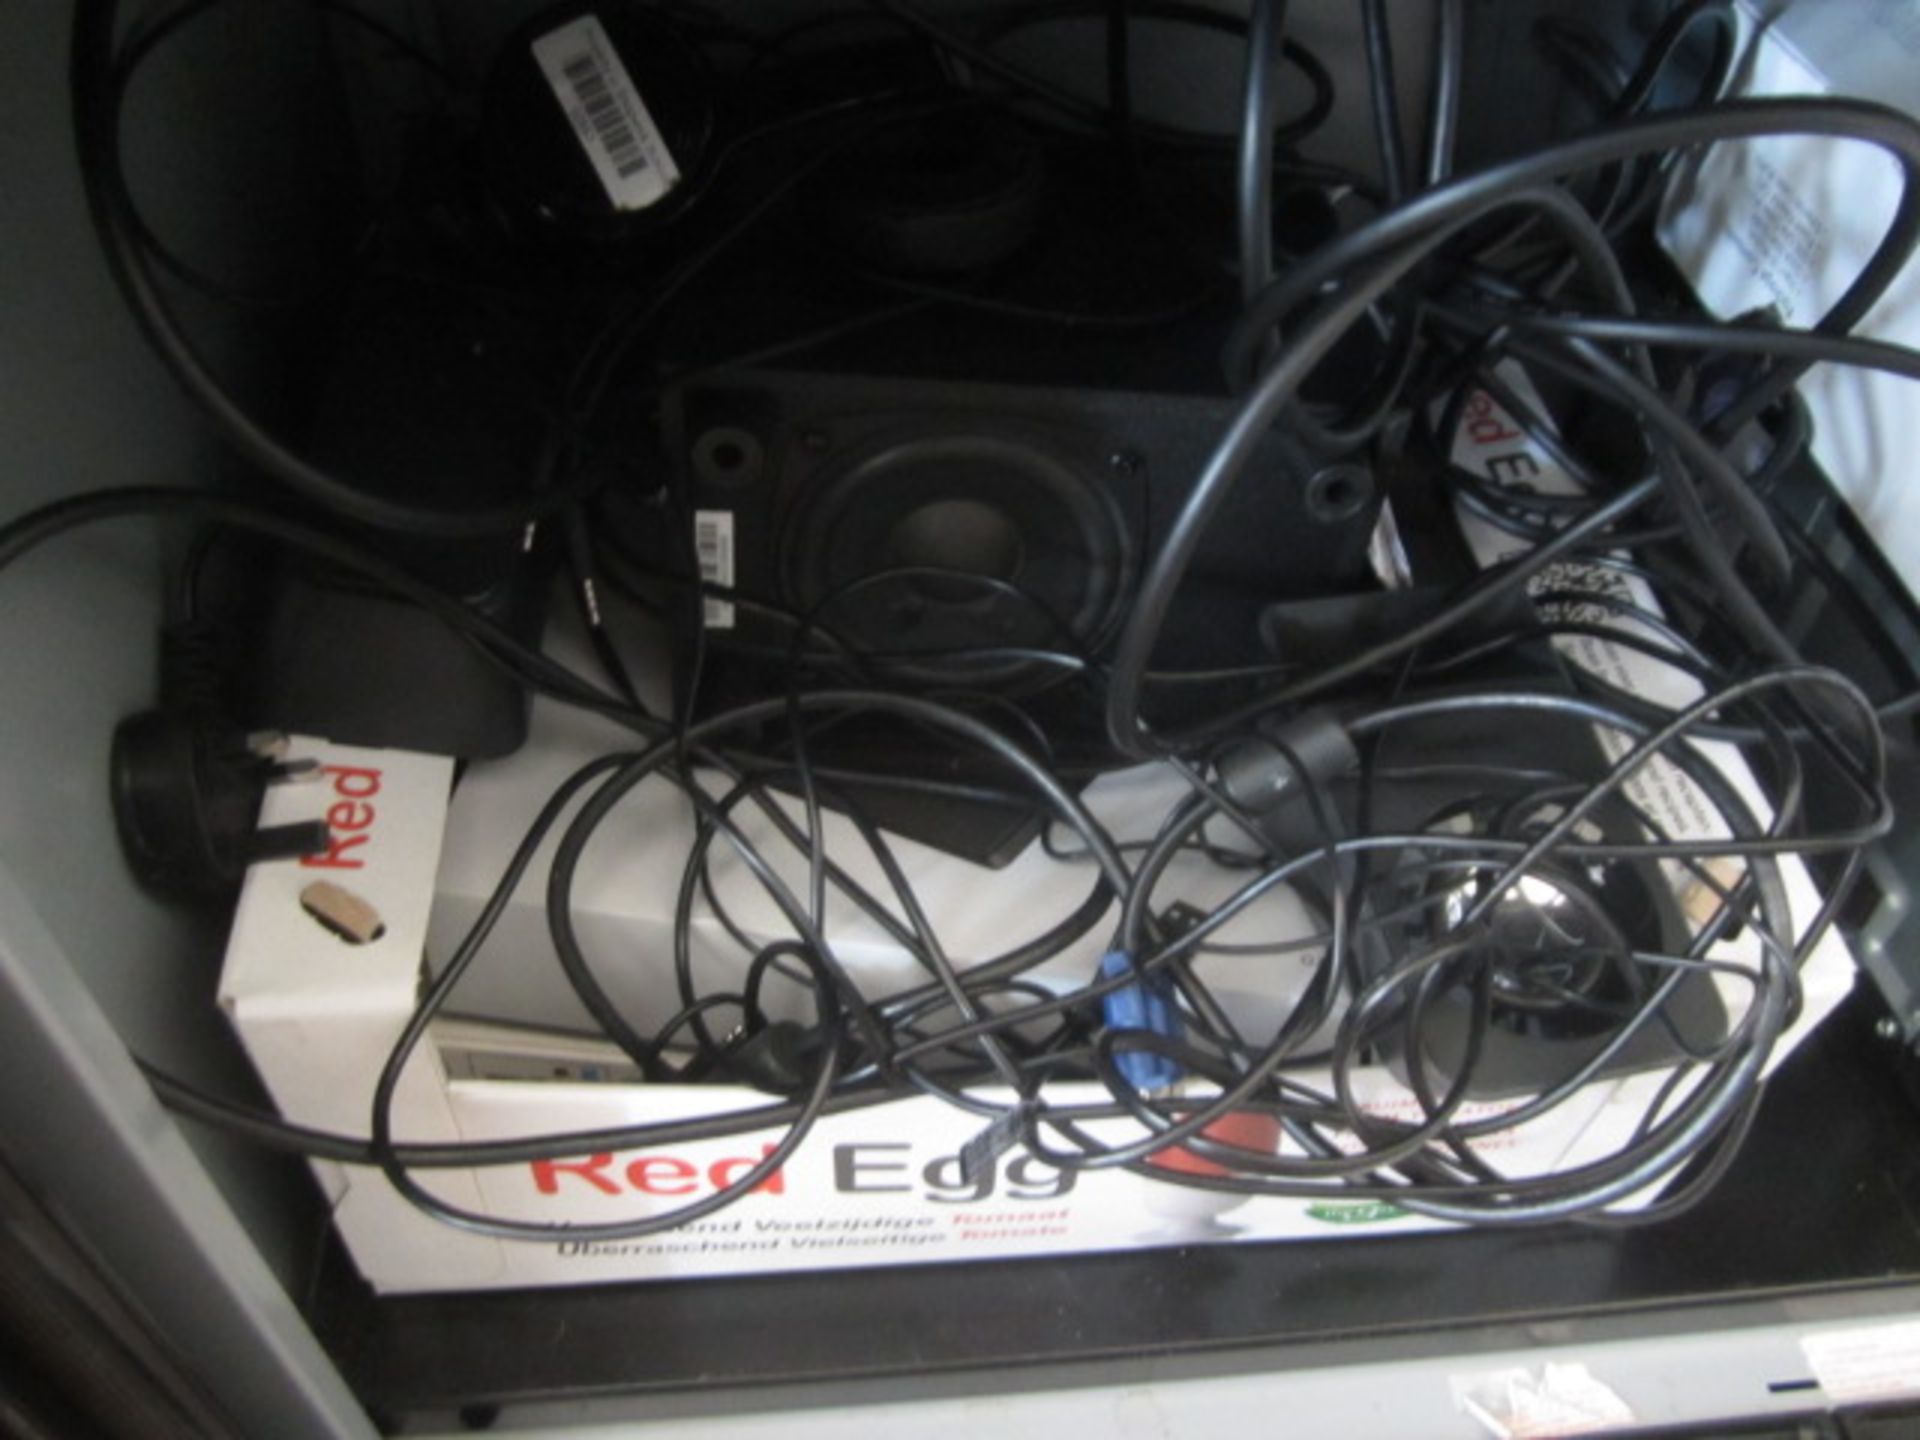 Remaining loose contents of IT equipment including 16 x assorted laptop - spares or repairs, X-VGA - Image 6 of 8